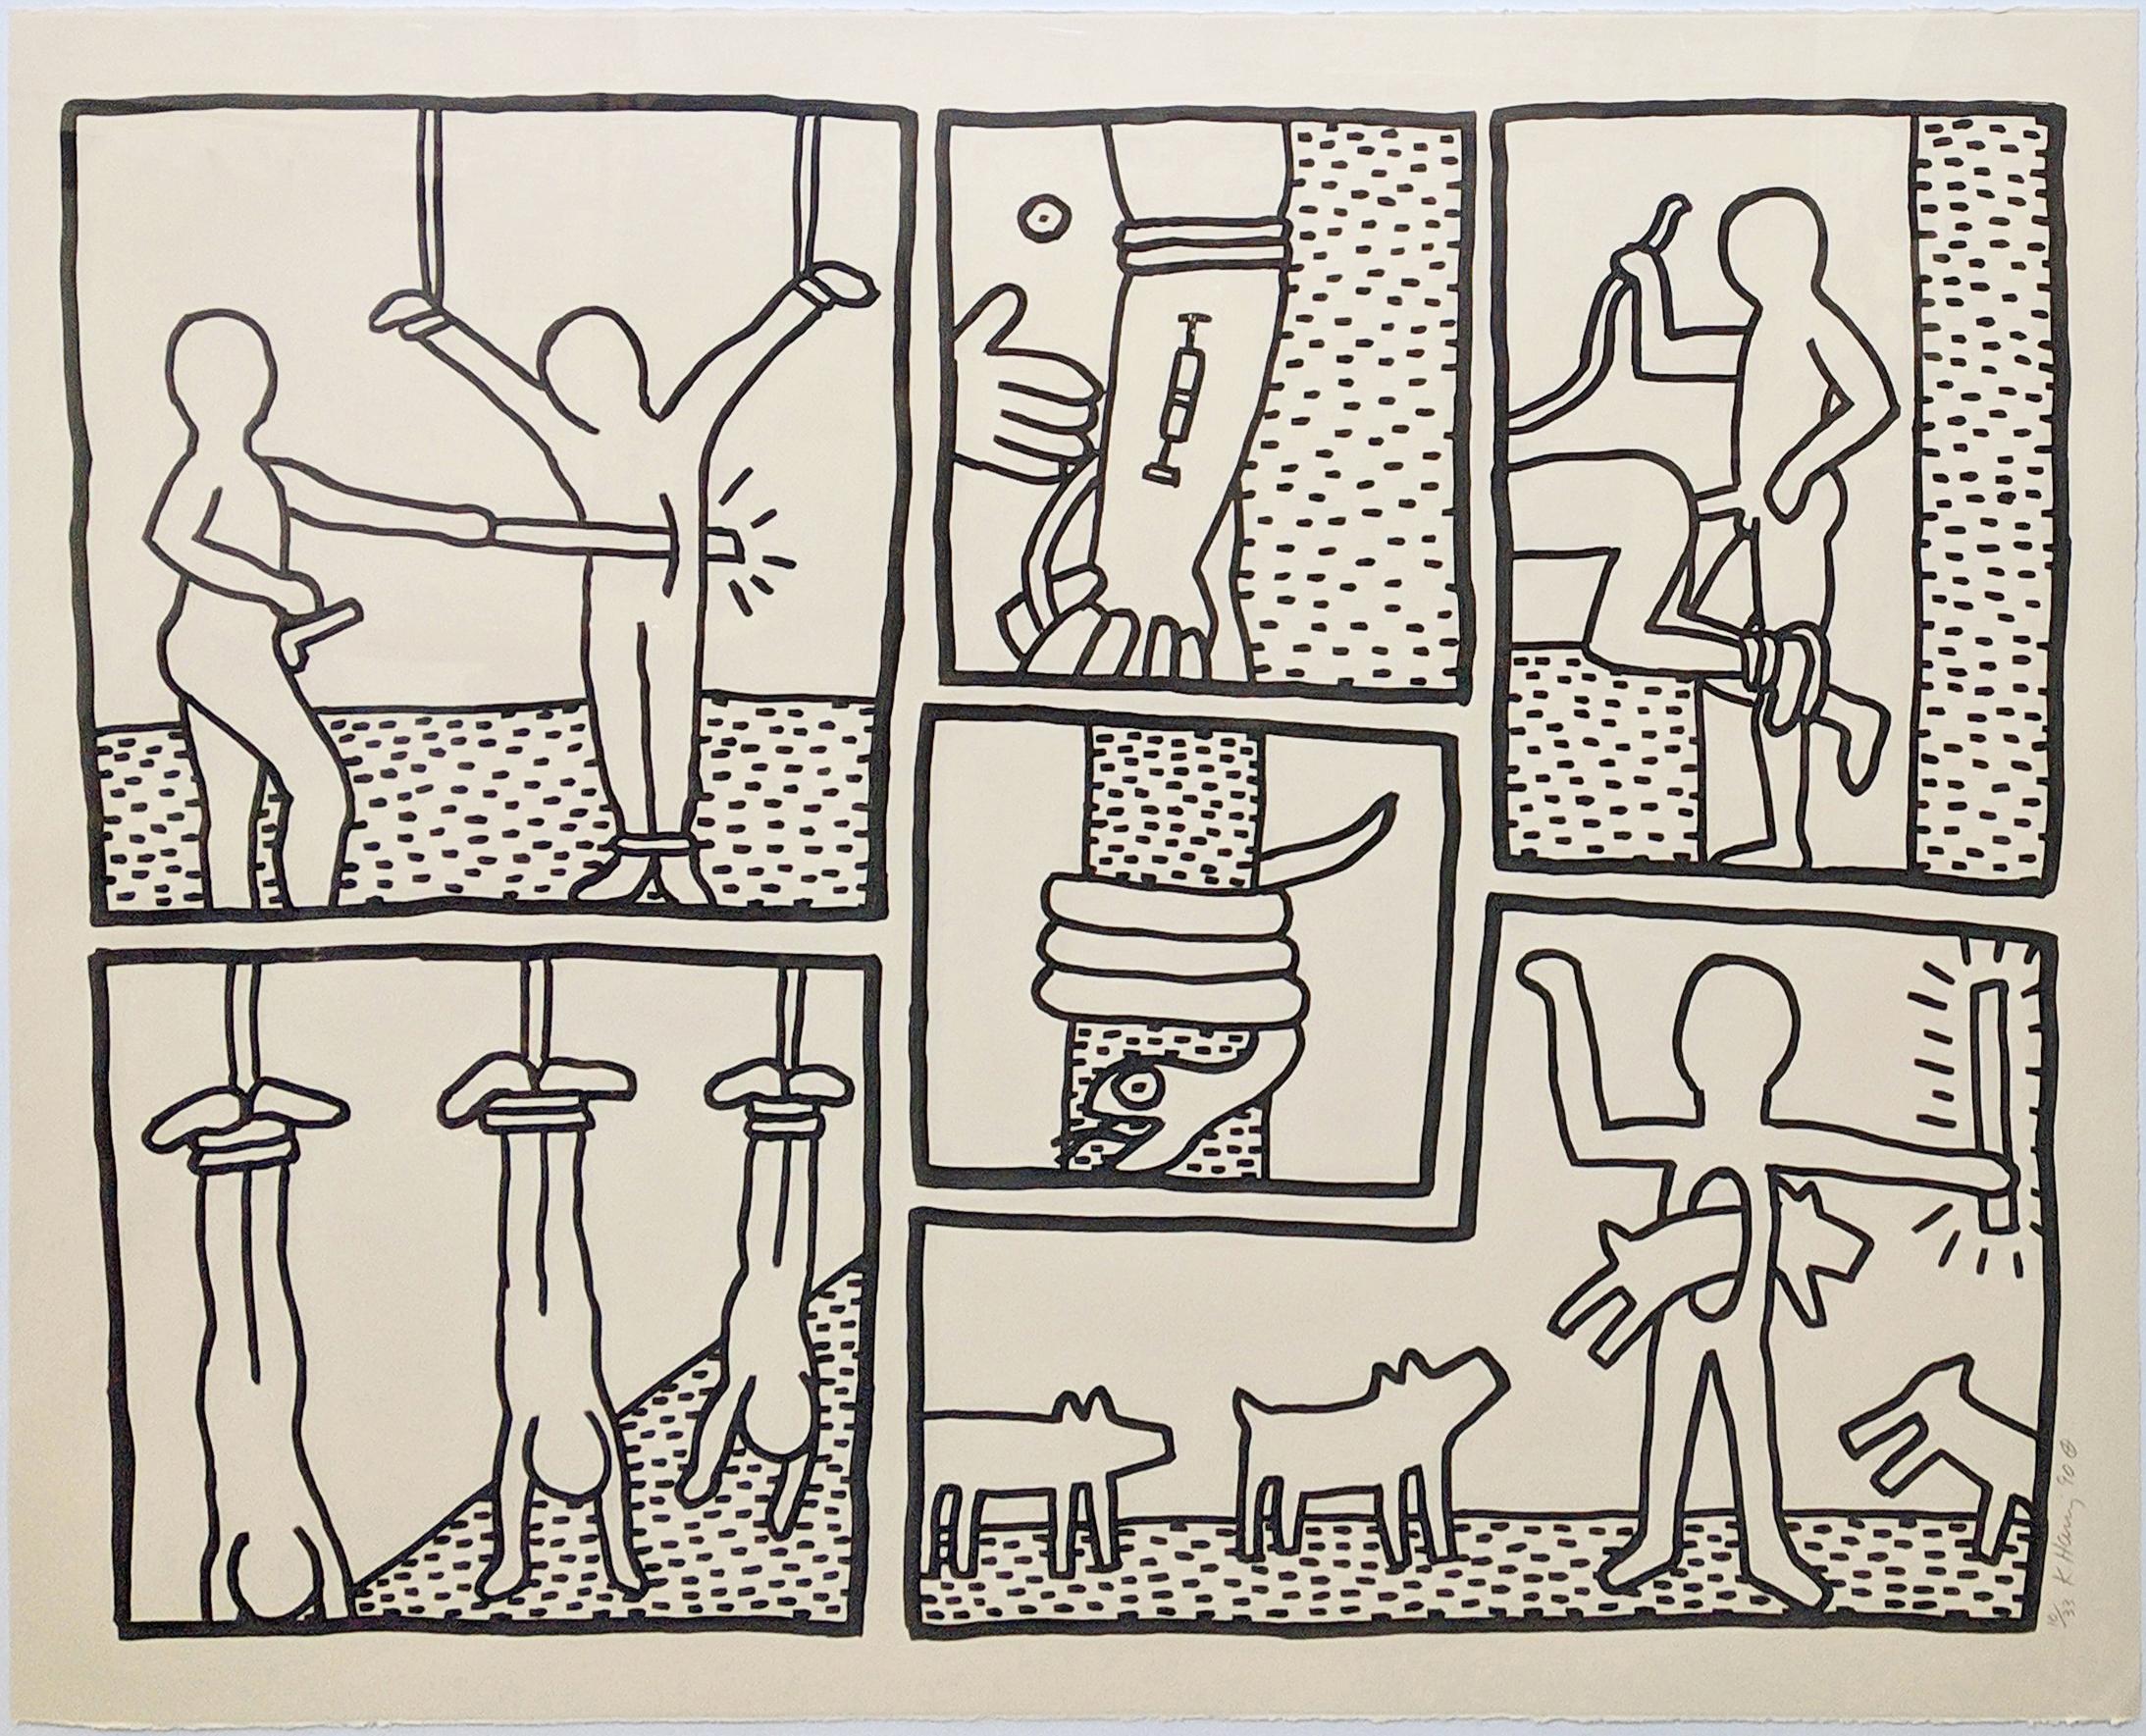 Keith Haring Nude Print - UNTITLED (FROM BLUEPRINT DRAWINGS)